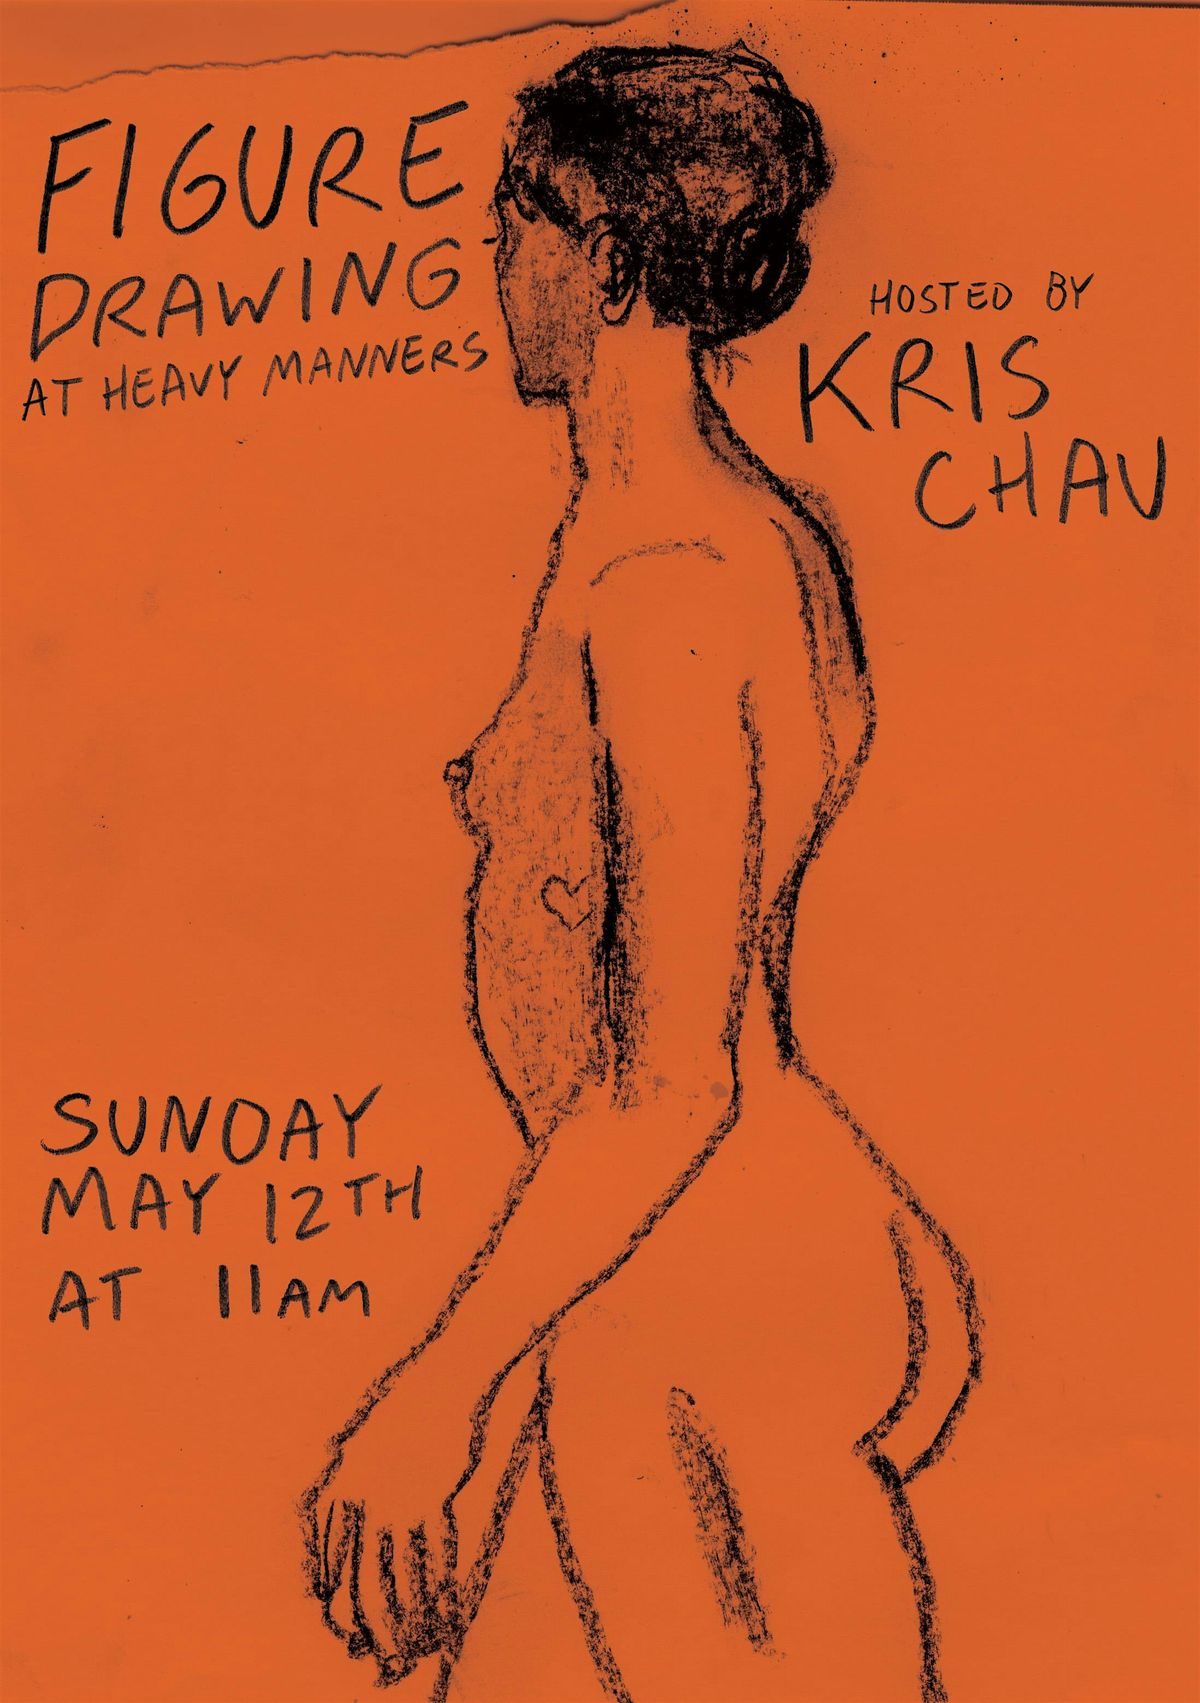 Figure Drawing at Heavy Manners Hosted by Kris Chau (5\/12)